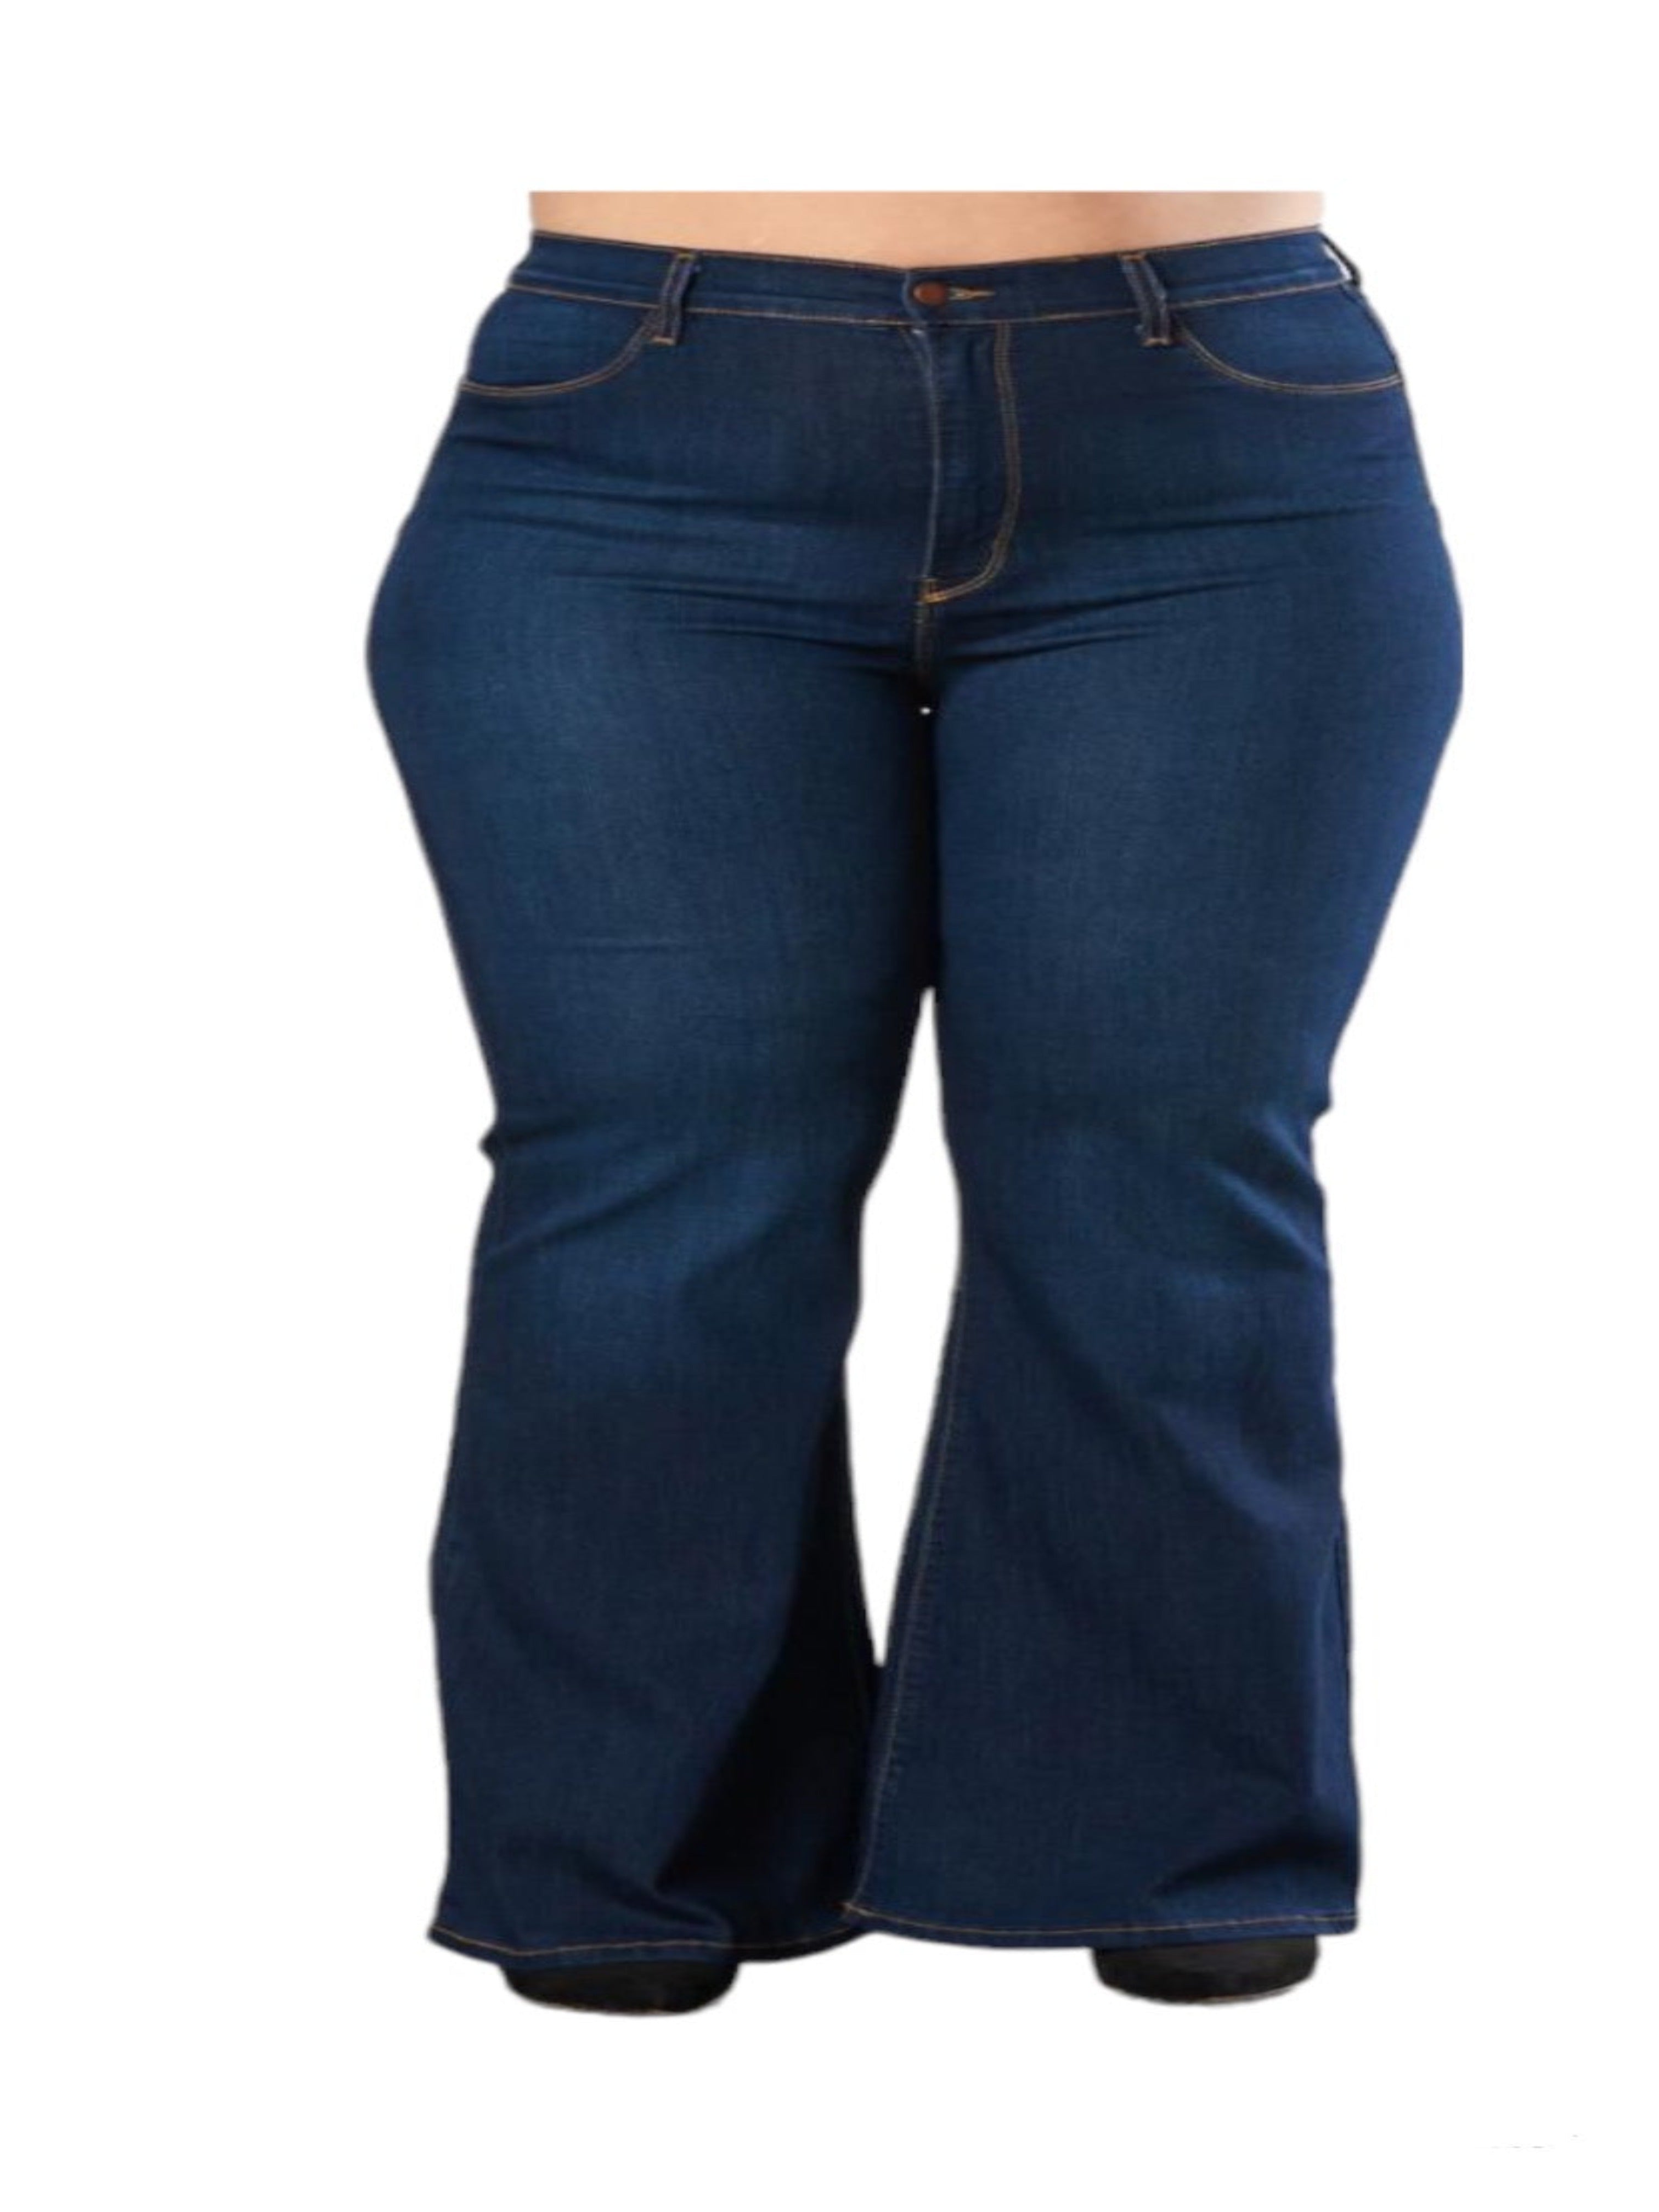 Flattering Flare Jeans For Plus Size Ladies